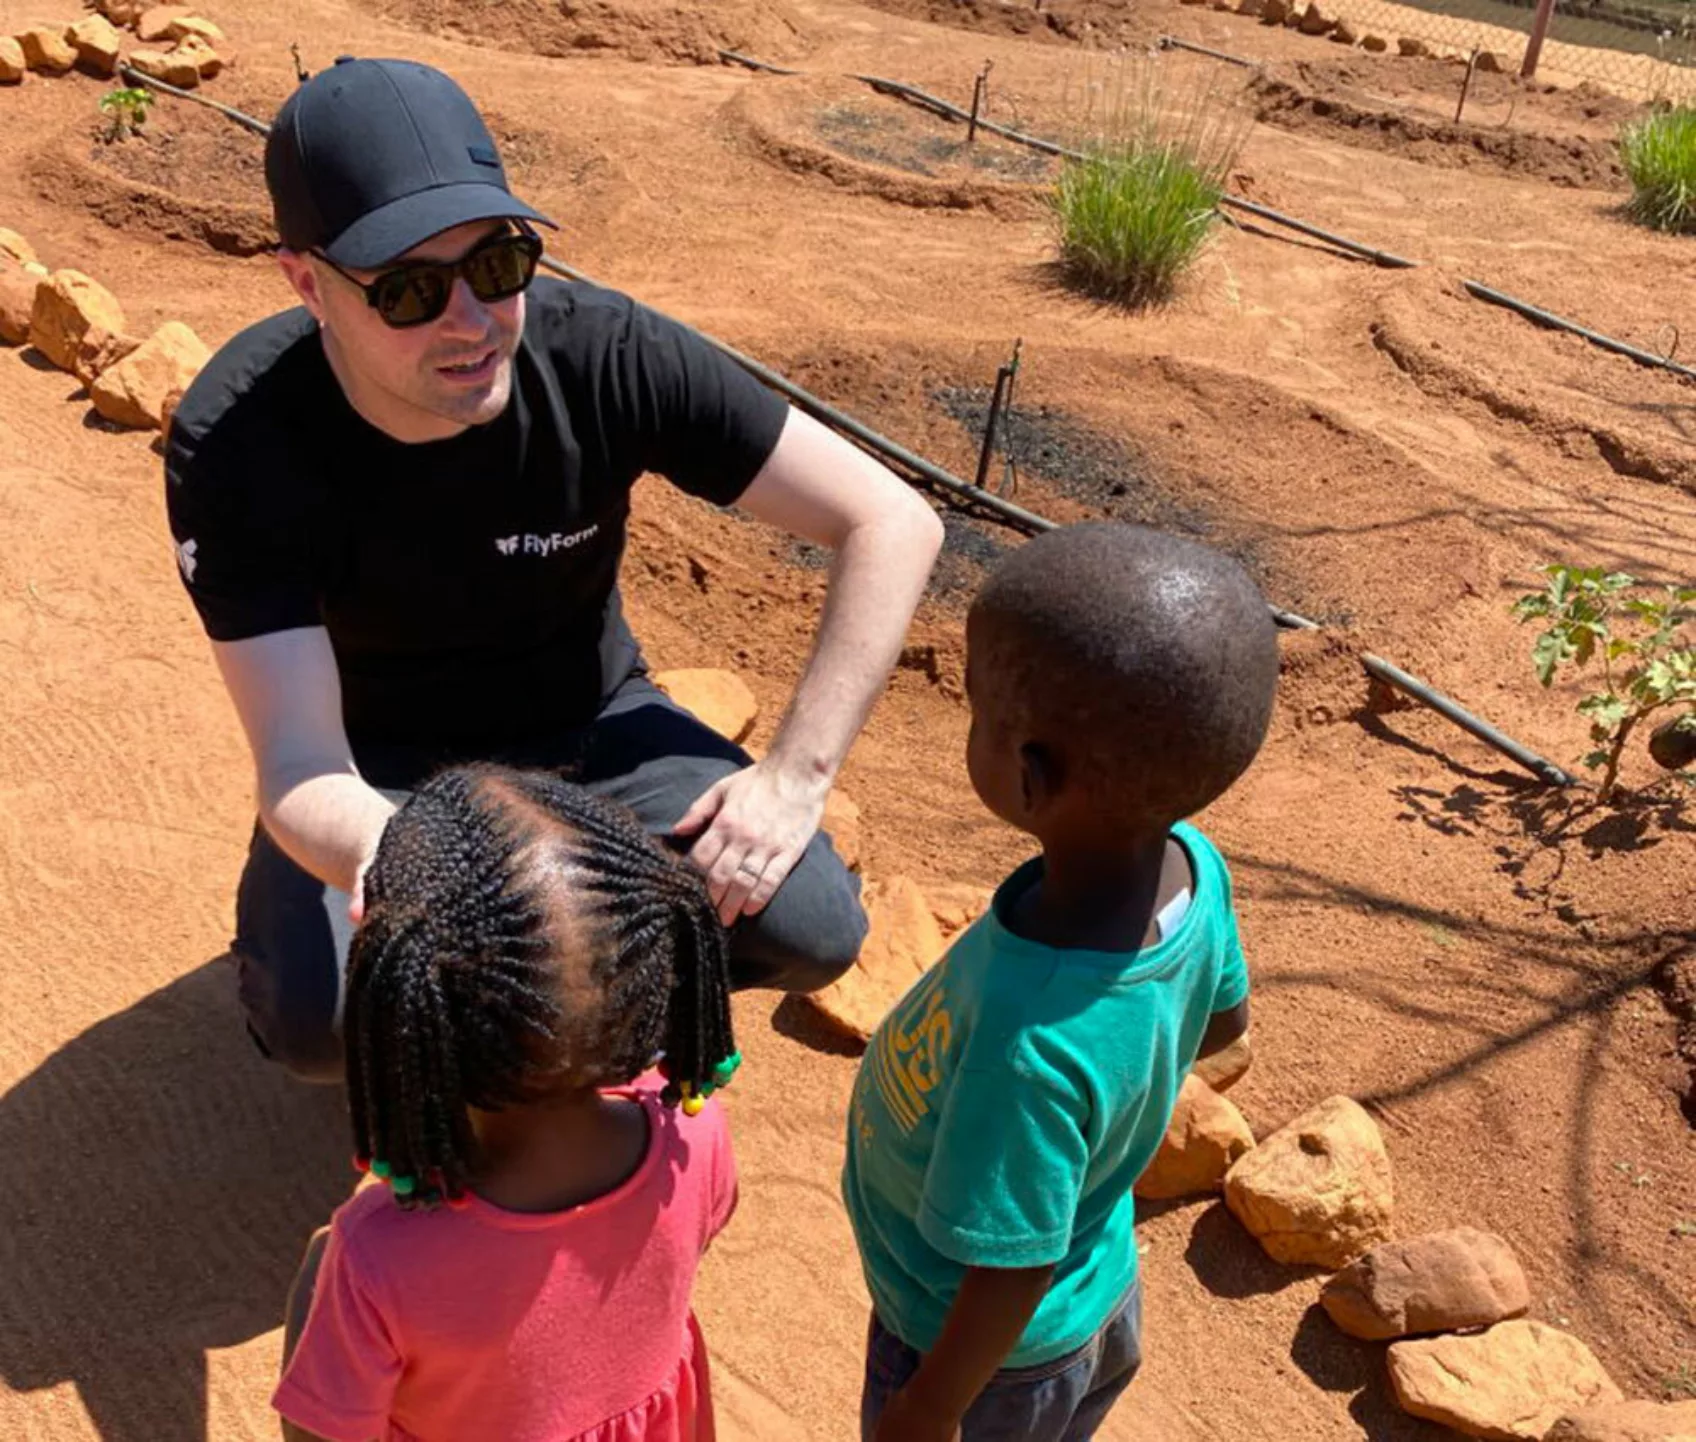 FlyForm's Steve Williams speaks with some local children who've benefitted from Ndlovu's malnutrition treatment.